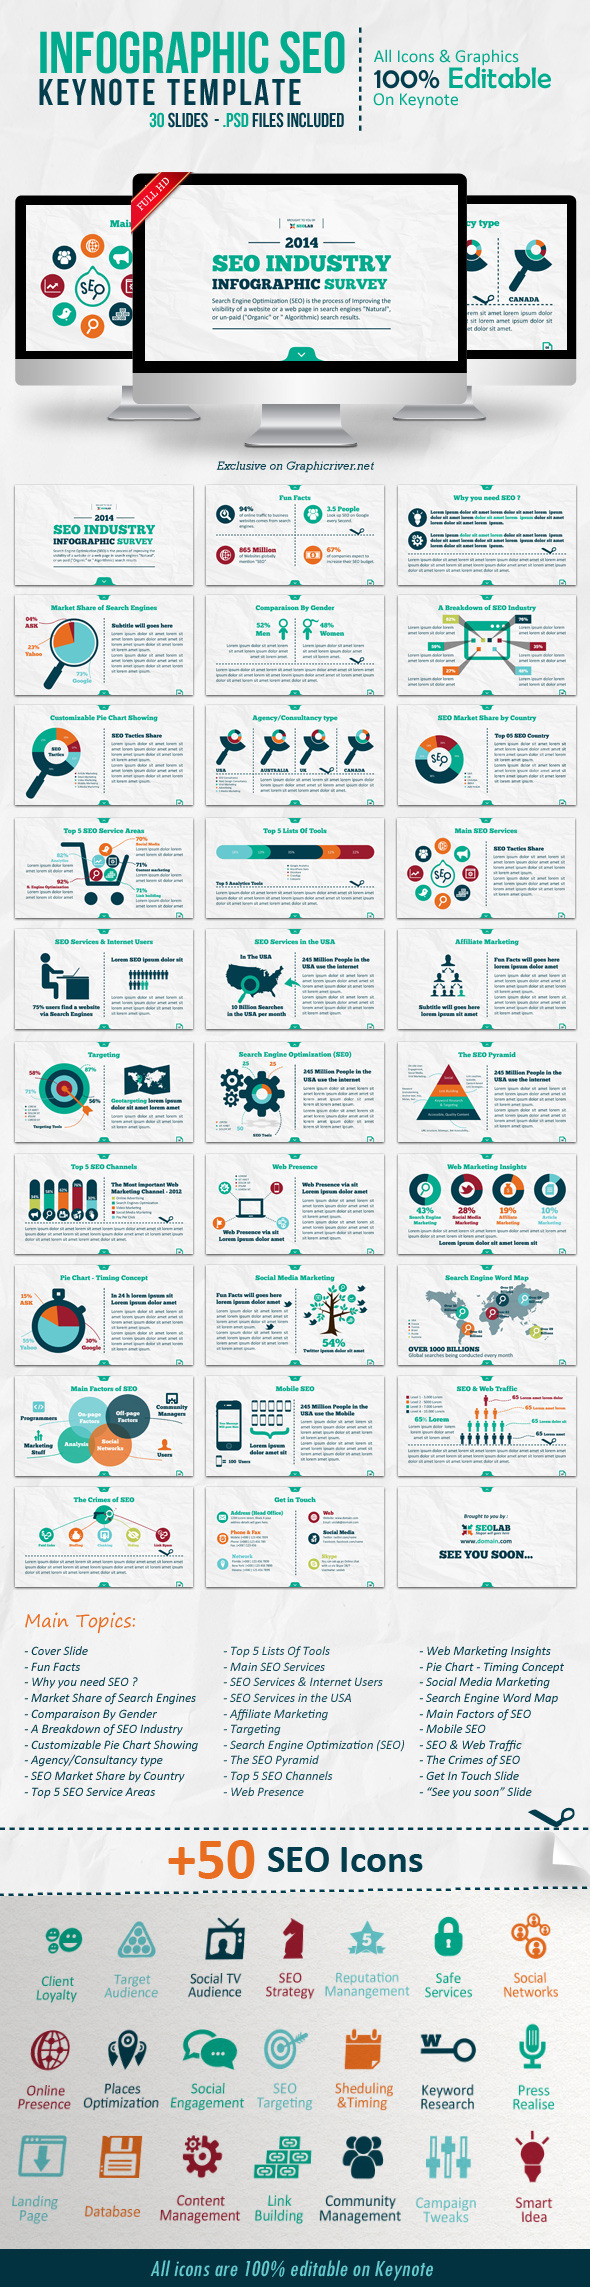 Infographic SEO Keynote Template